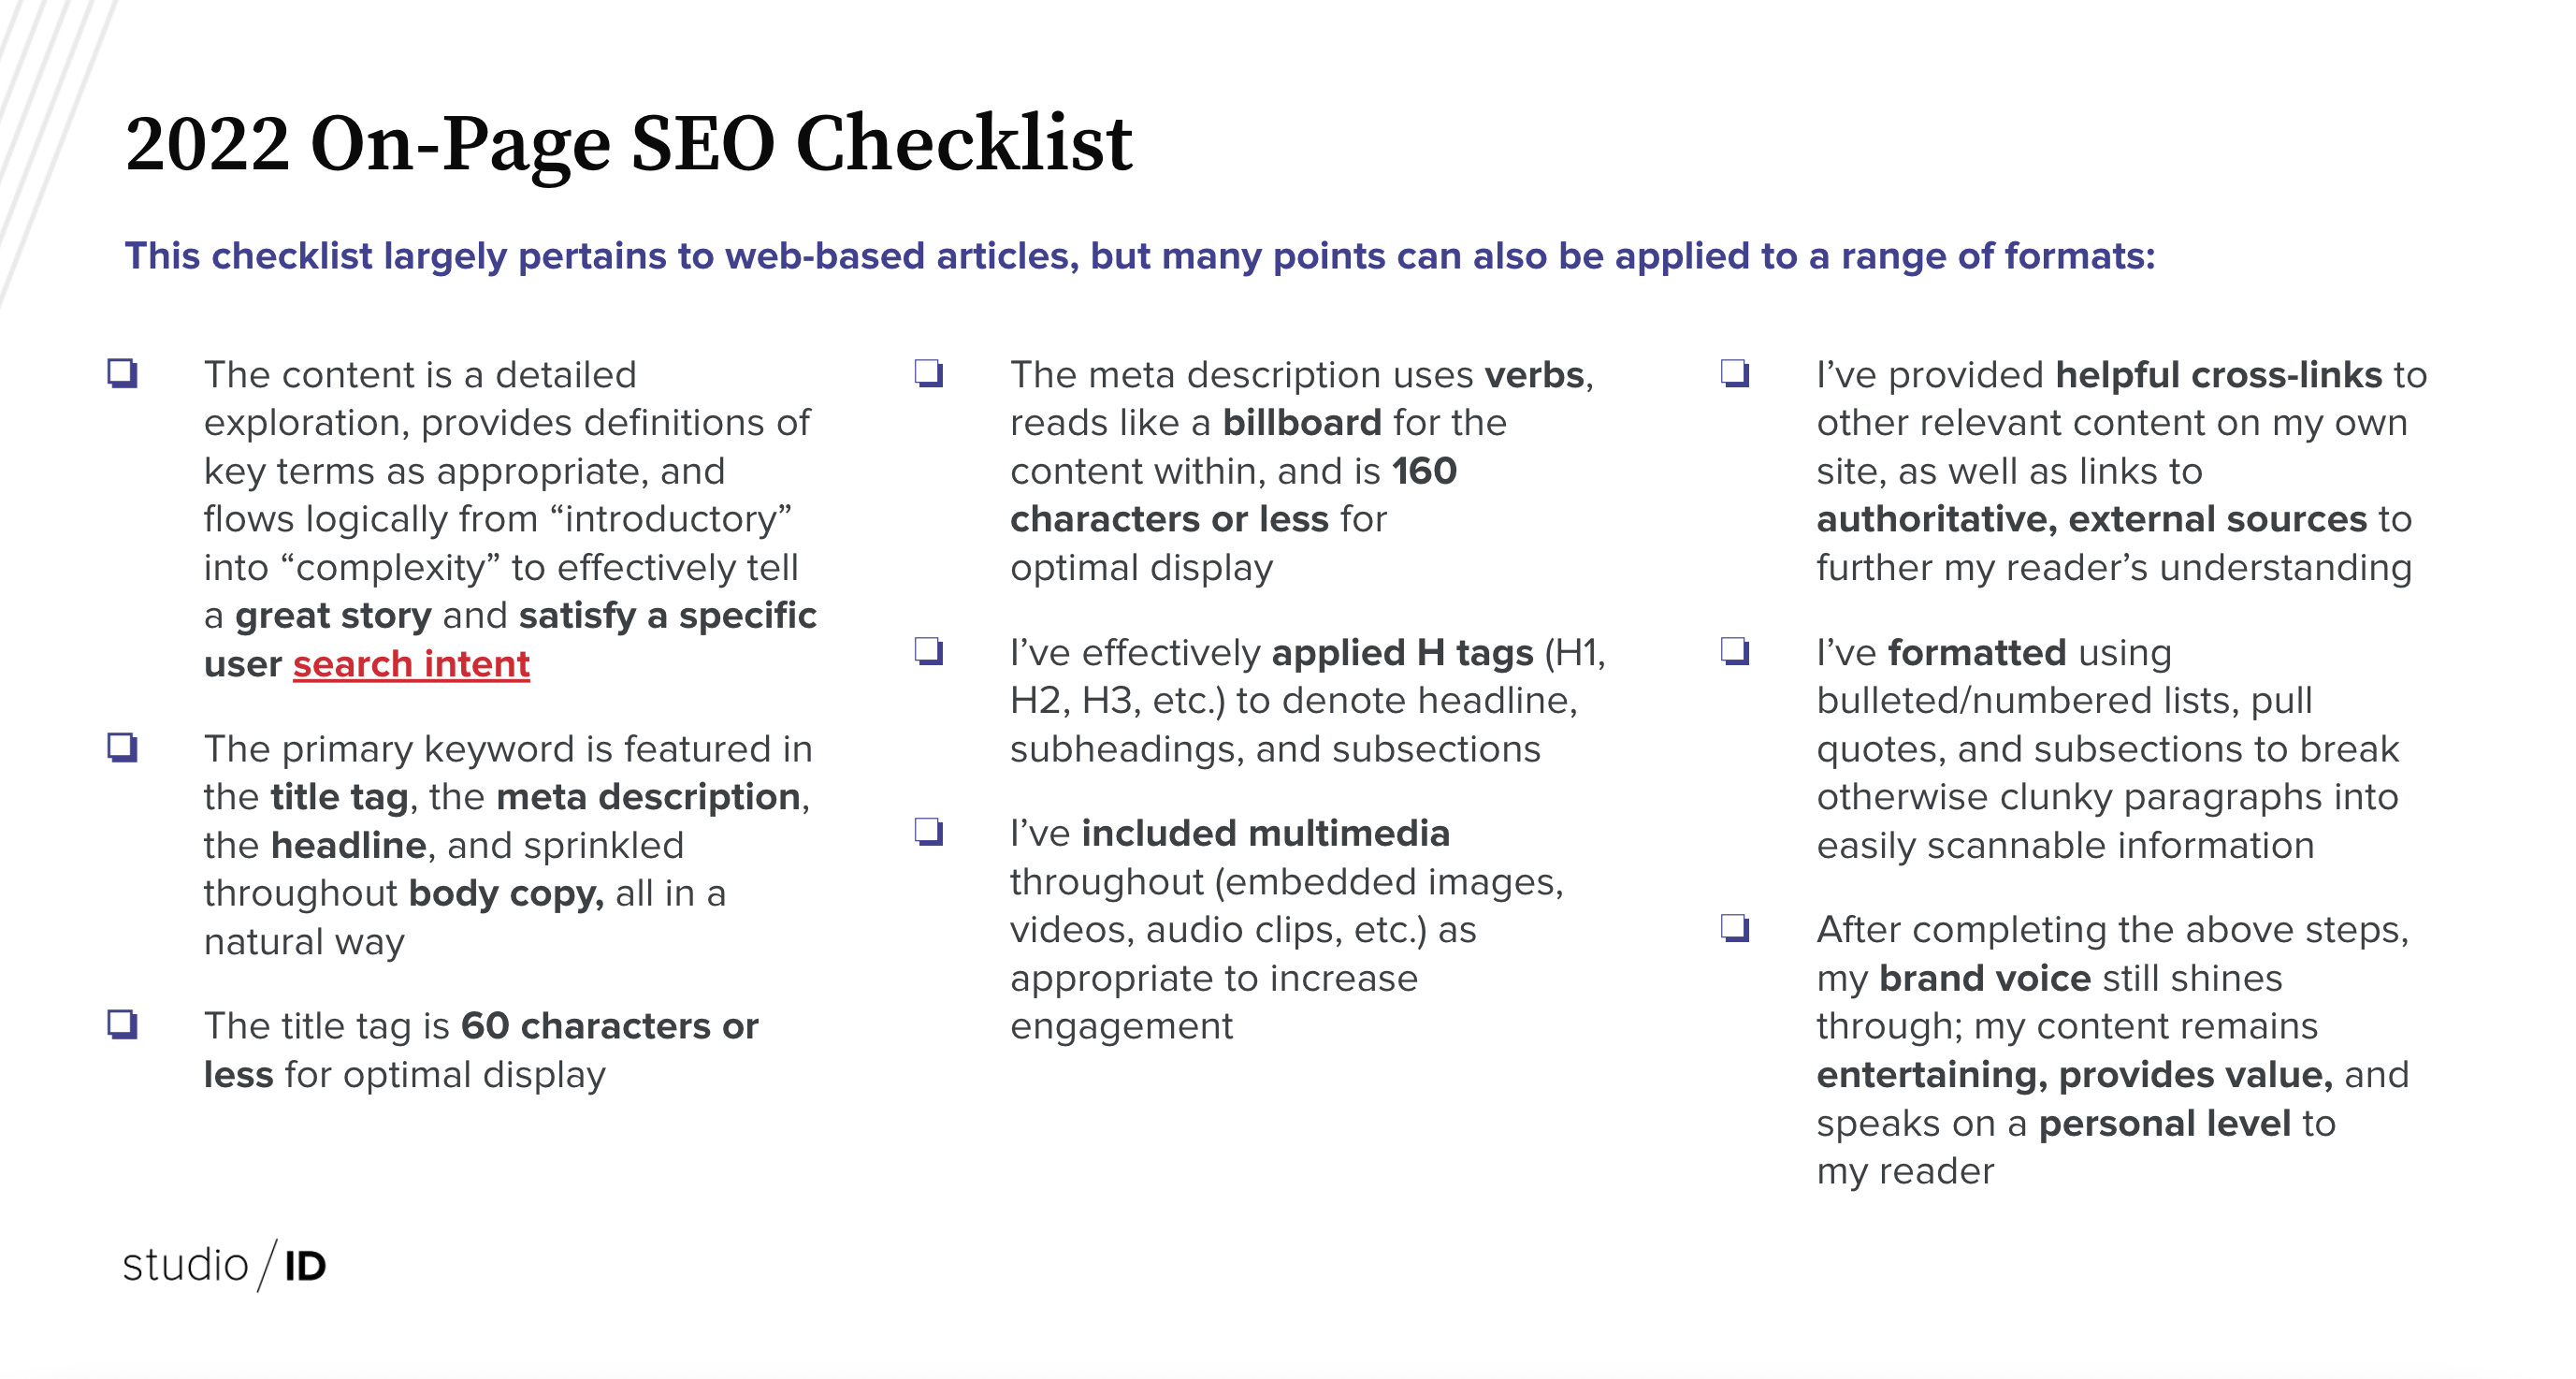 studioID's-2022-On-Page-SEO-Checklist.png